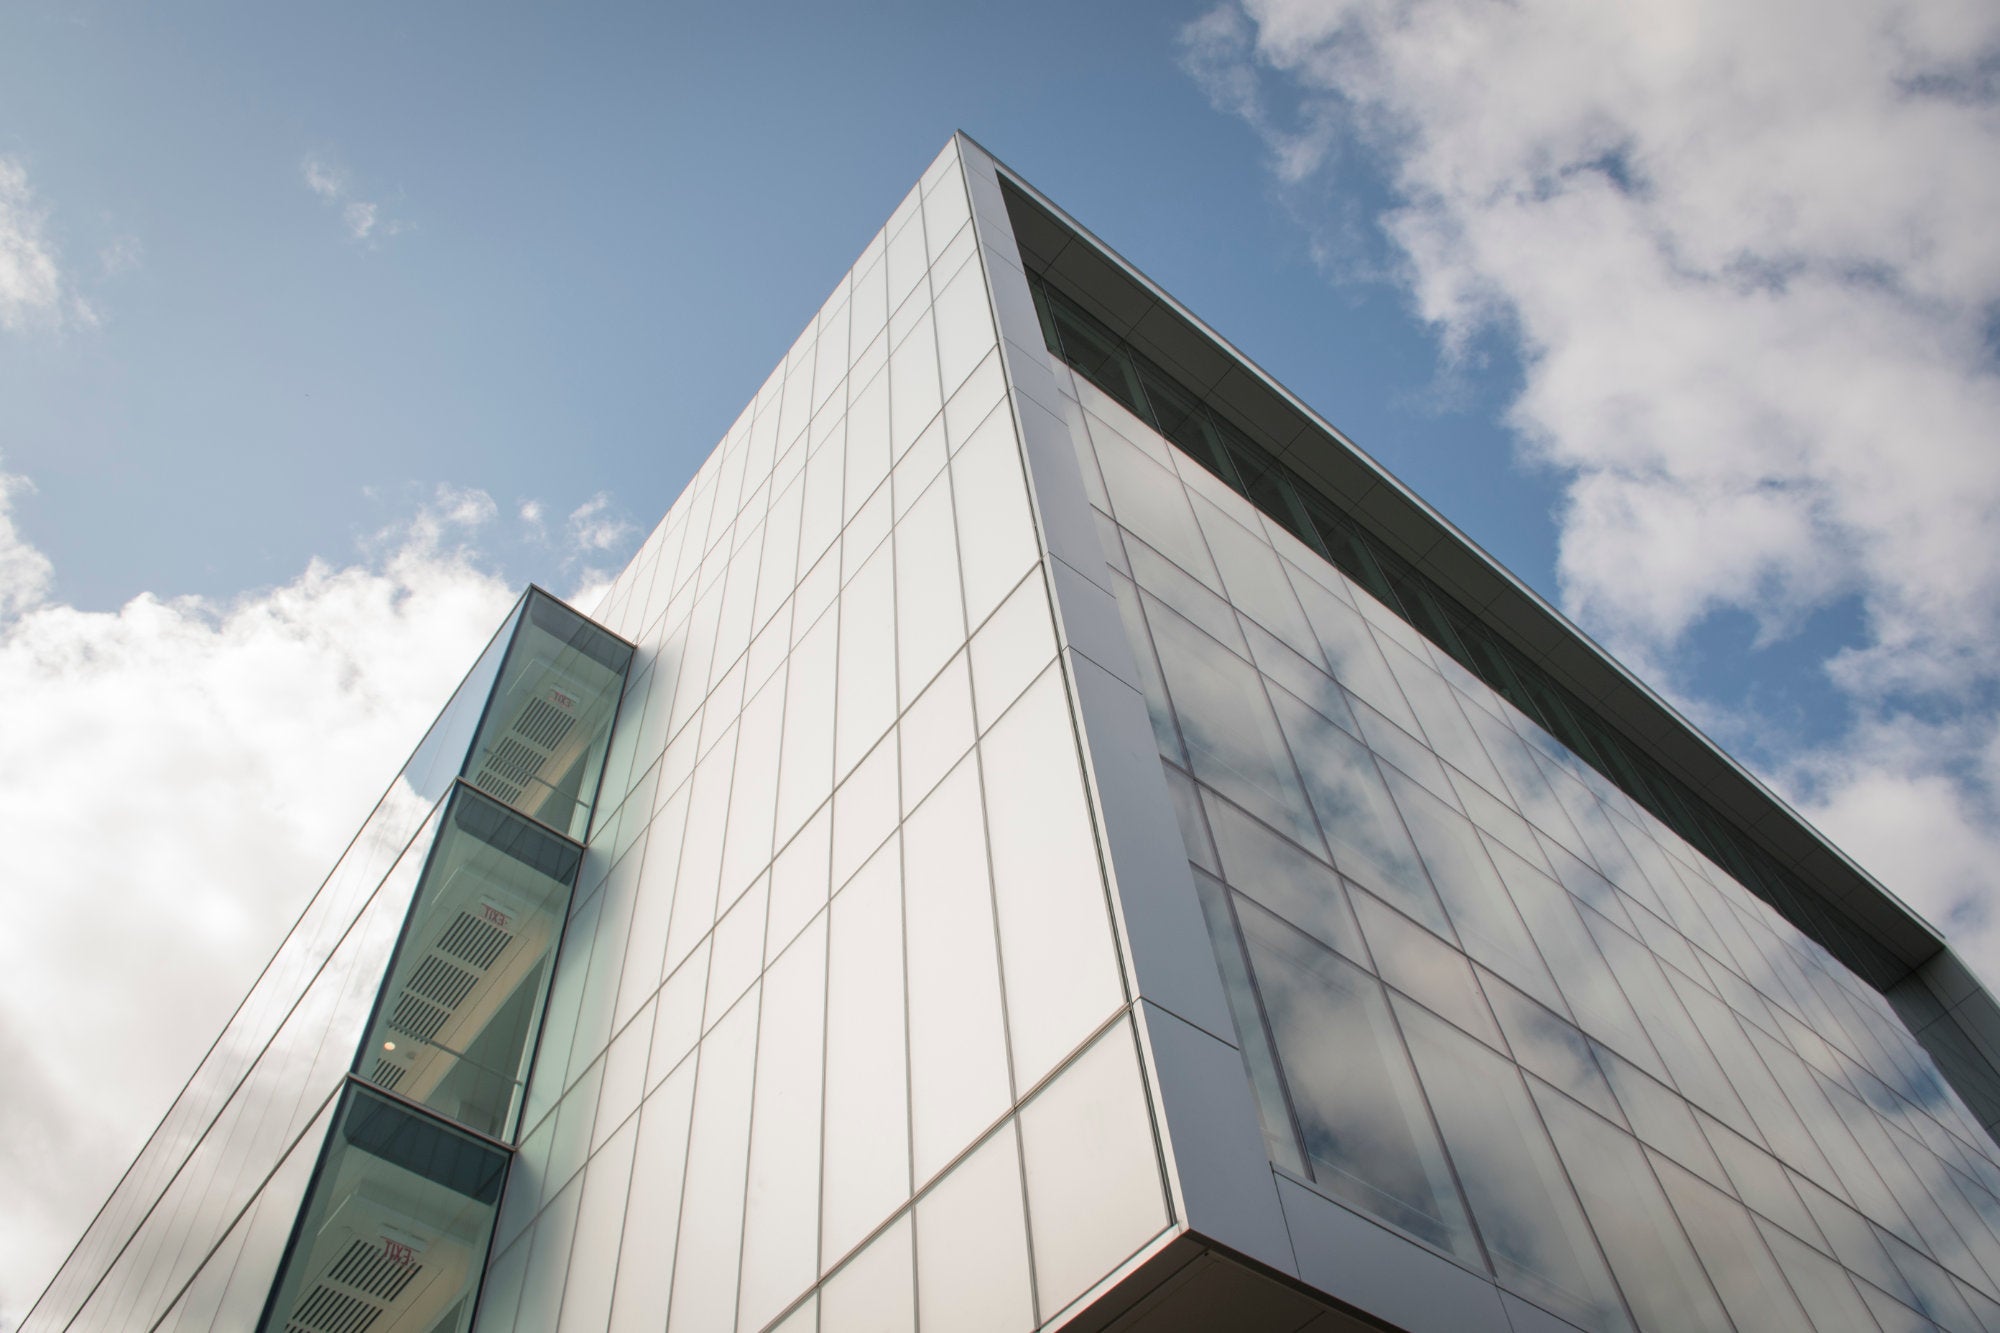 A diagonal view of the glass facade, Fascitelli Center for Advanced Engineering